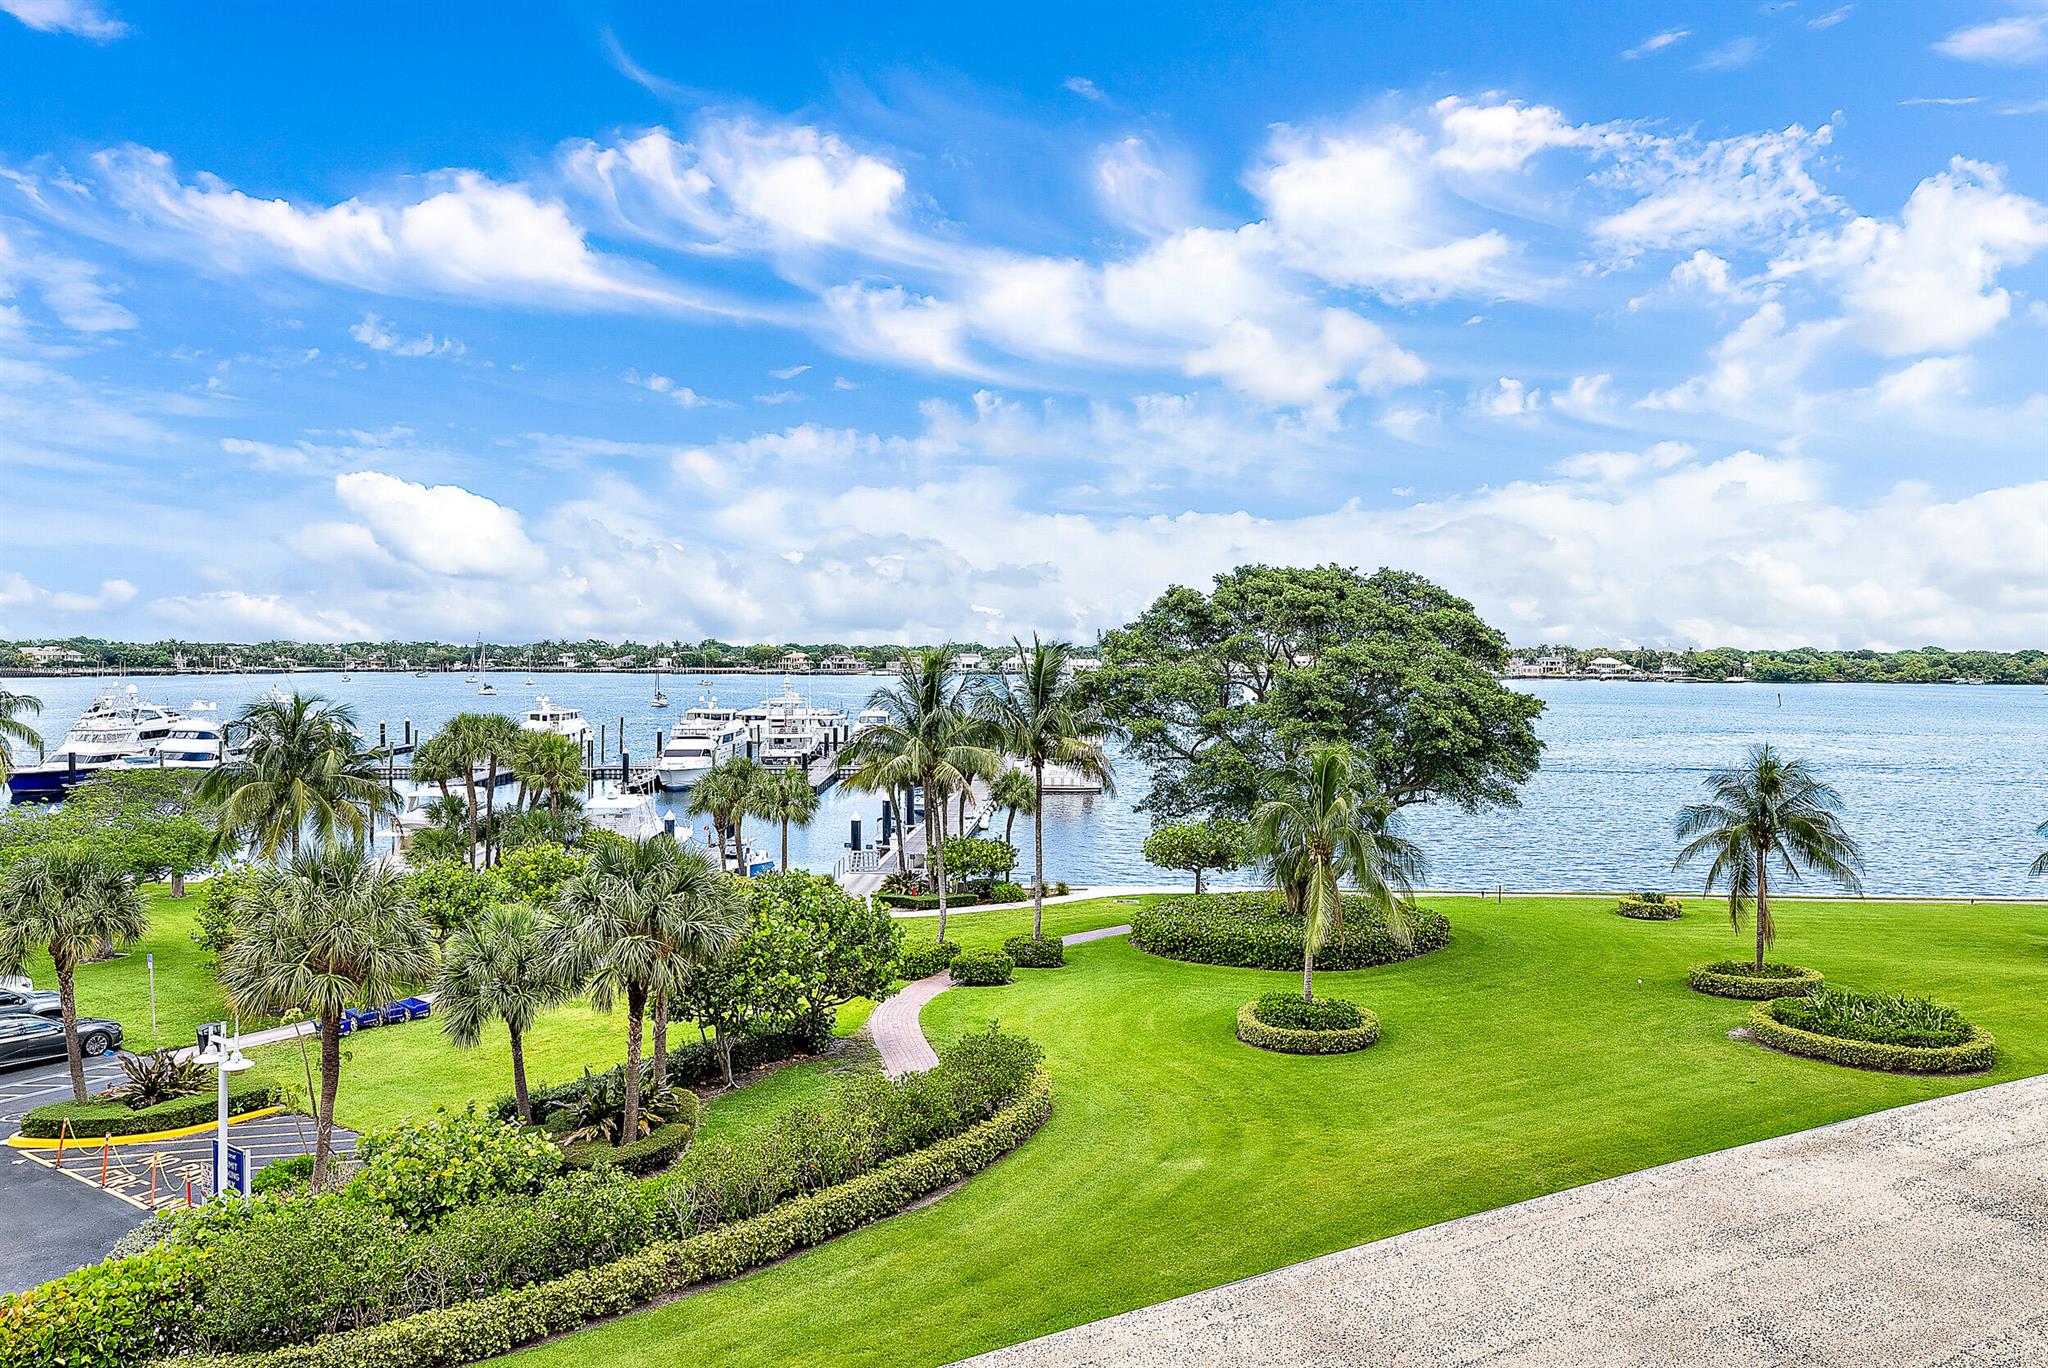 Enjoy stunning views of the intracoastal waterway through floor to ceiling sliding glass windows. The spacious living room opens up to a large balcony perfect for enjoying your morning coffee or evening cocktail while watching the boats go by.  The updated floors, kitchen appliances, quartz countertops, and backsplash will give the space a fresh and modern feel. With walls removed for a more open feel, this condo has been completely transformed into a spacious and airy living space. And the completely remodeled bathrooms will provide a luxurious and spa-like experience. Quay North at Old Port Cove is secure & gated. The community offers its own restaurant and marina as well as a heated pool with sauna, showers and a fitness center. Stay fit with 2 miles of walking paths along the water marked in 1/4 mile increments with rest stops along the way. You can take advantage of the beautiful nearby North Palm Beach Country Club with a Jack Nicklaus designed golf course, pool, tennis courts, pickleball and restaurant/bar. Multiple pristine beaches and ocean front parks are nearby as well as world class shopping including the Gardens Mall, Downtown at the Gardens, Legacy Place and Worth Avenue in Palm Beach. You'll never run out of amazing restaurant choices. Palm Beach airport is less than a 20 minute drive.